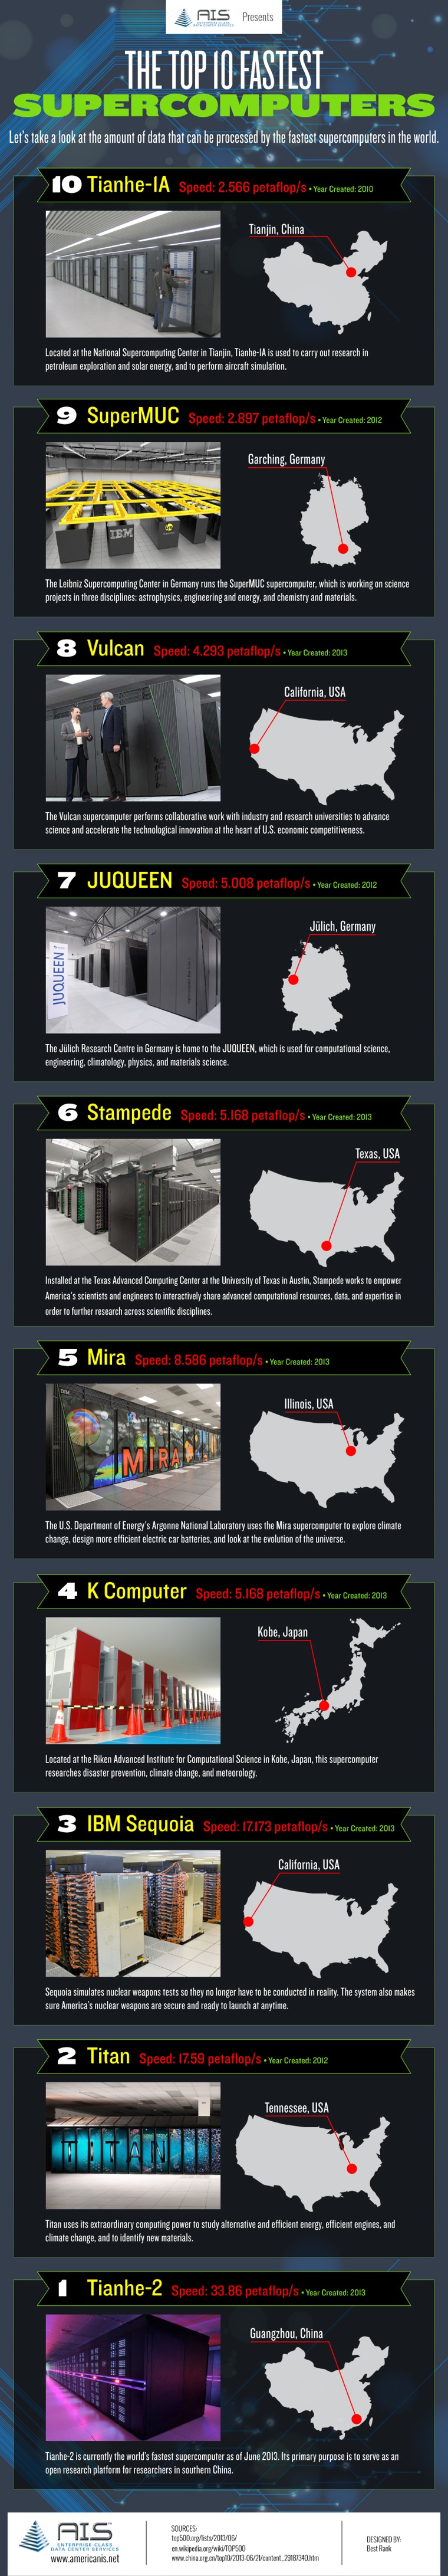 Top 10 Fastest Supercomputers In The World [Infographic]